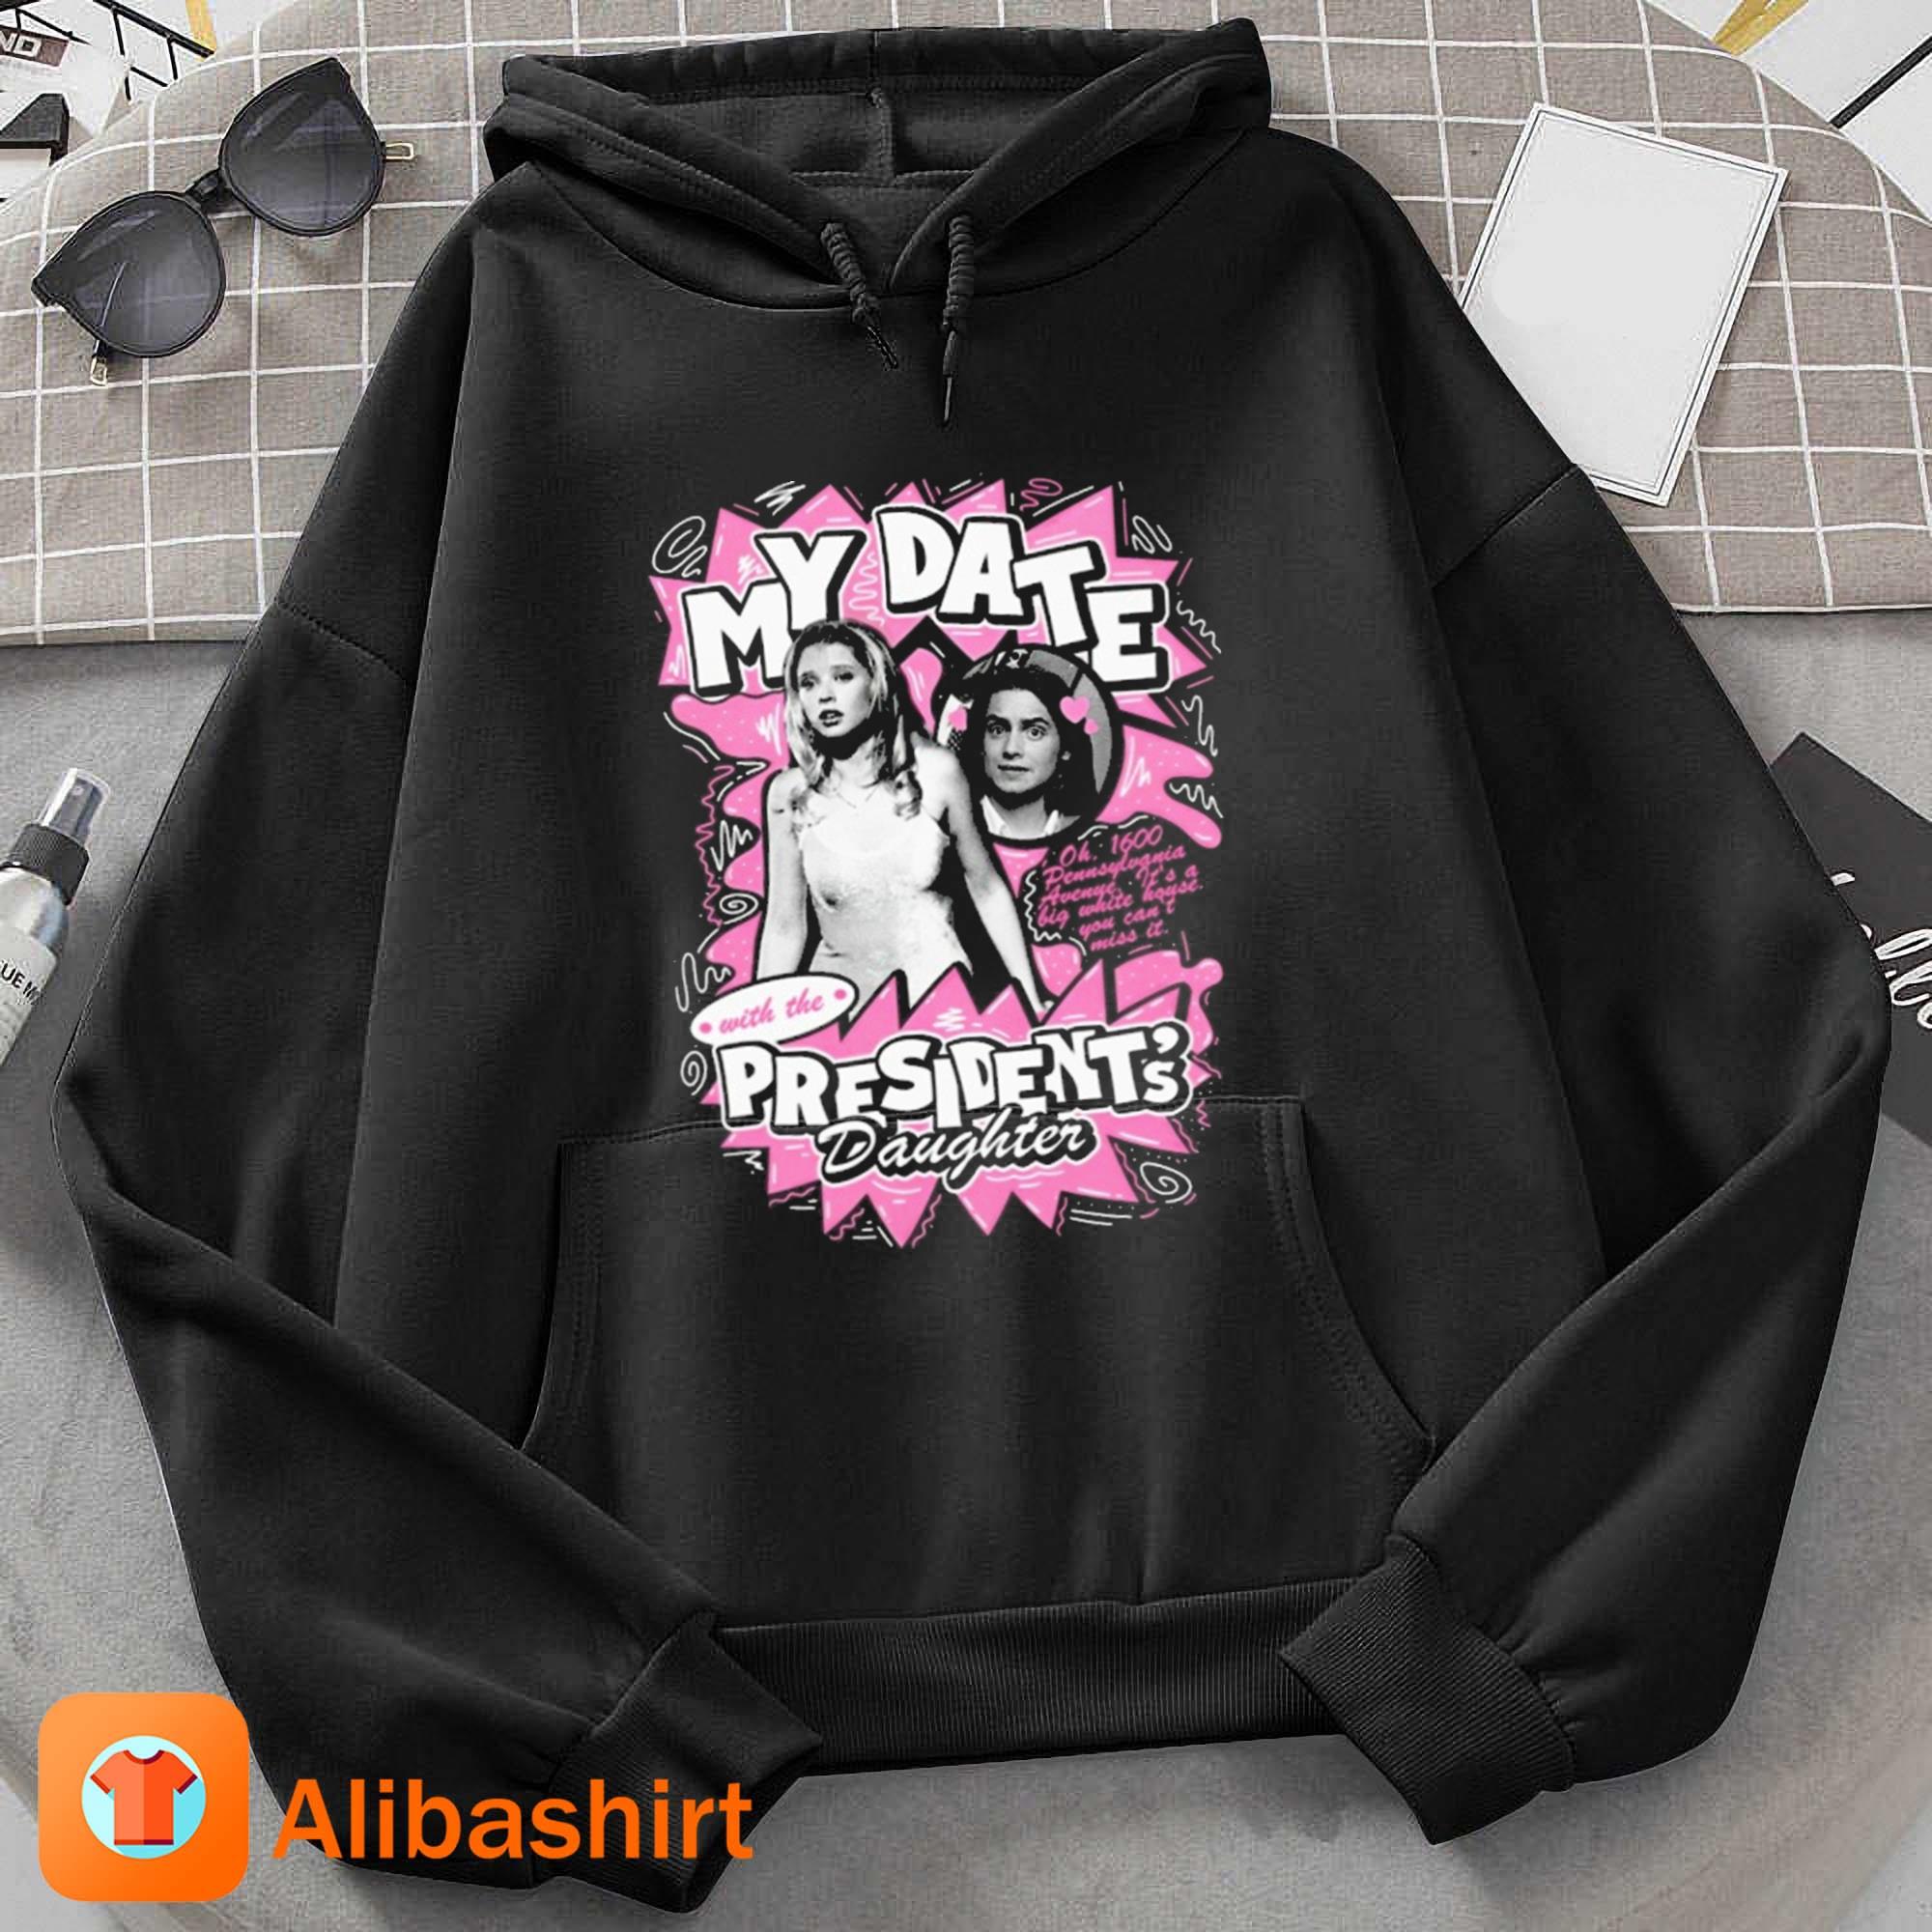 My Date With The President's Daughter Shirt Hoodie